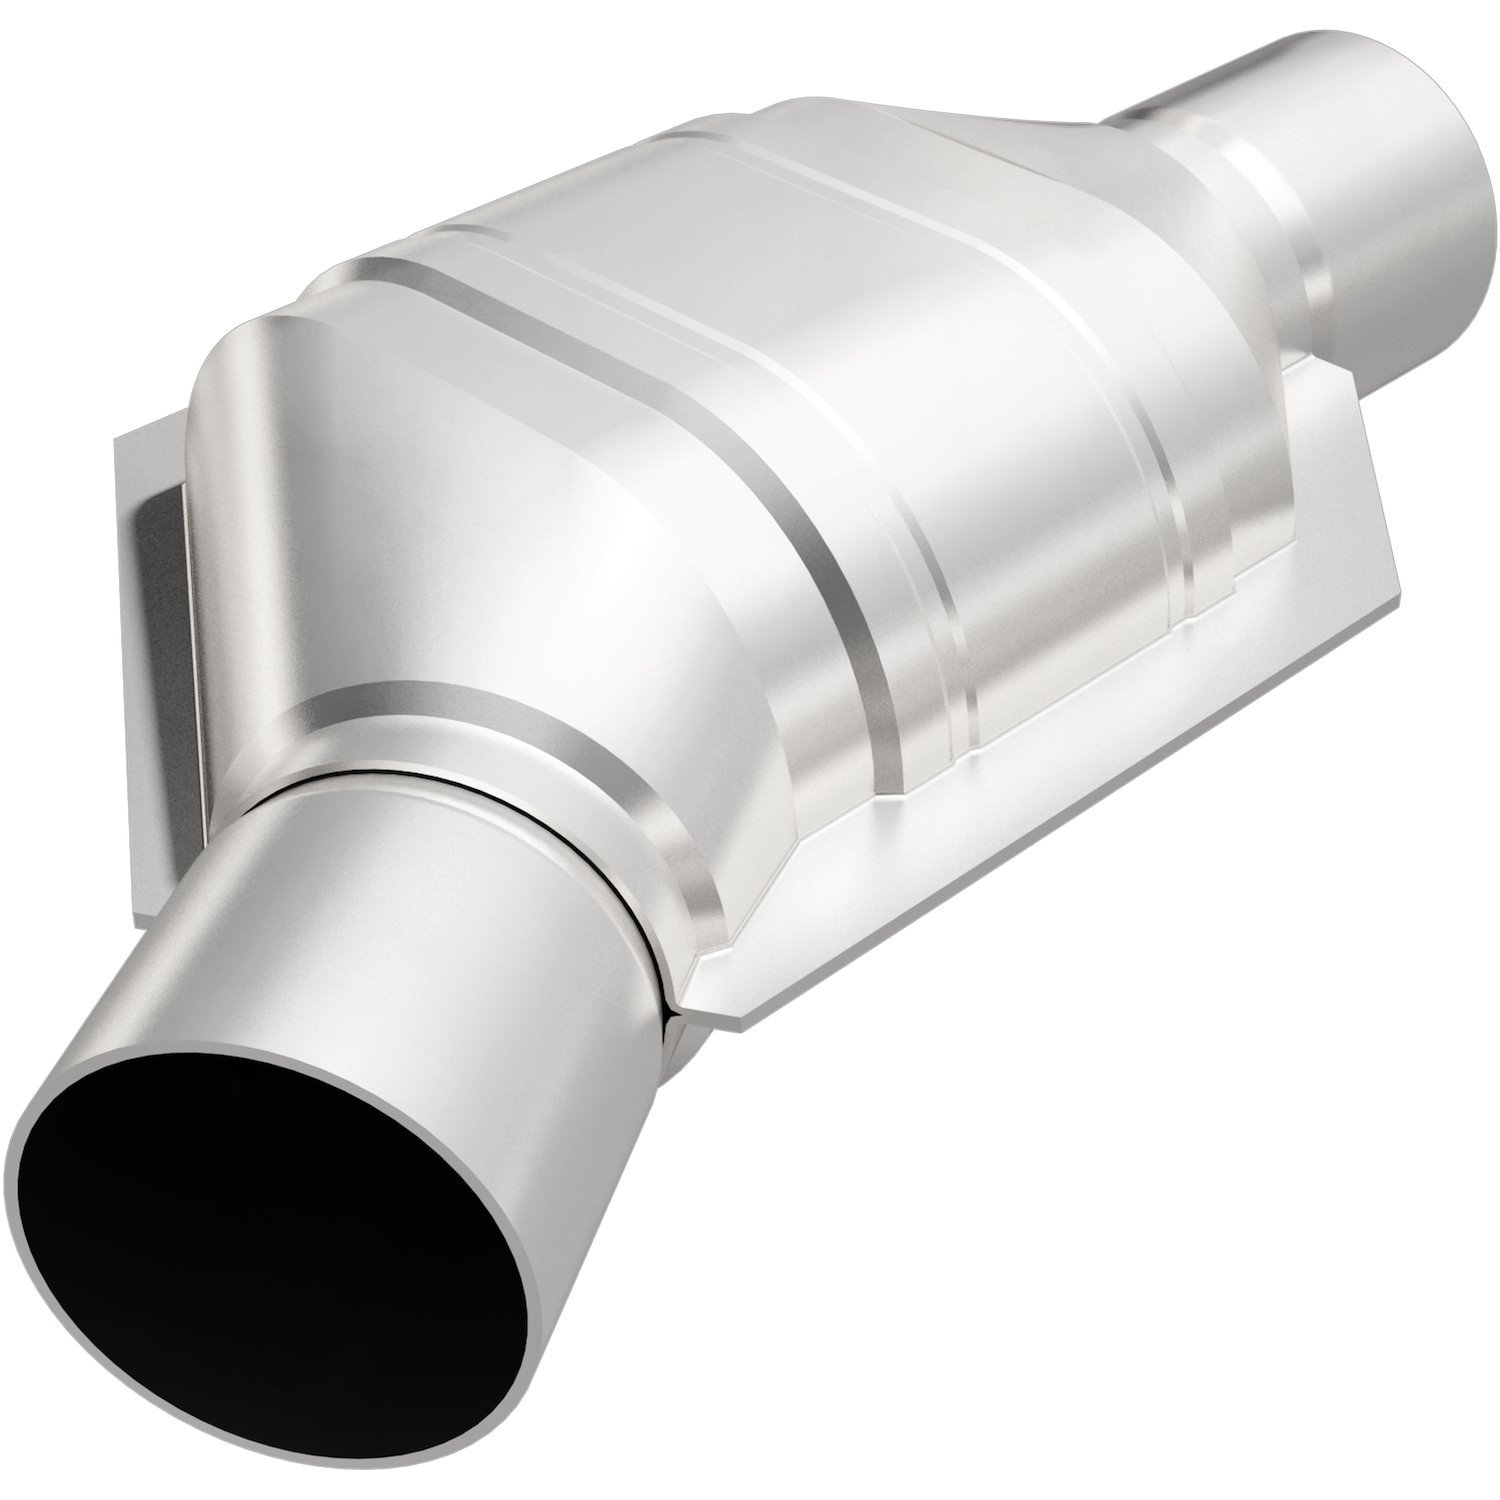 Pre OBD-II Universal Catalytic Converter Body Shape: Angled Oval, Center/Offset